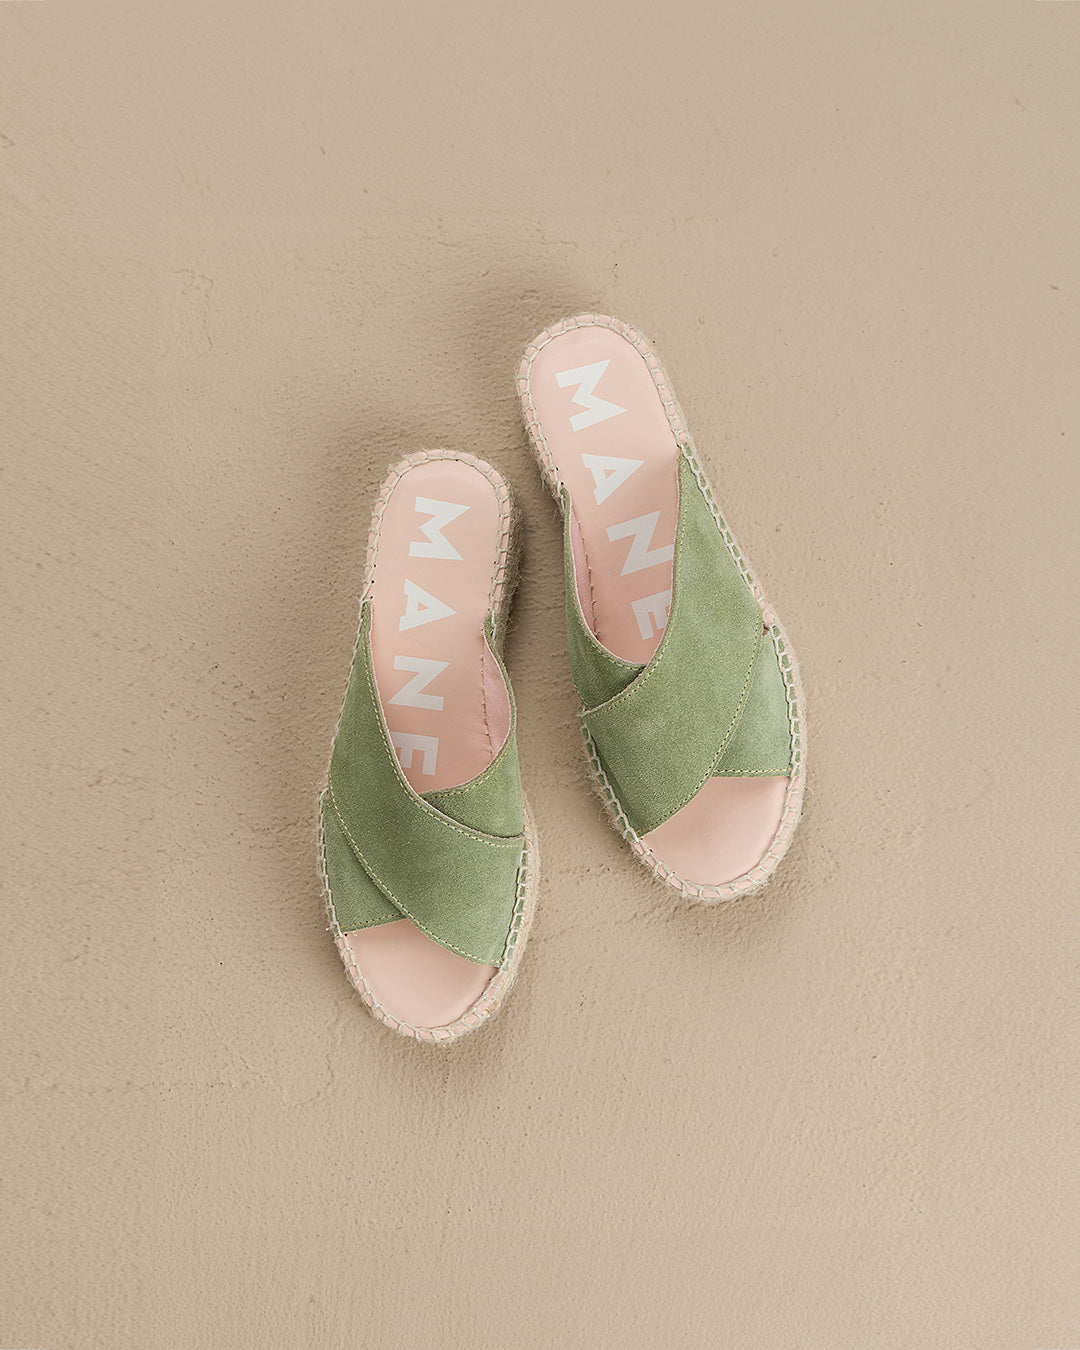 Suede Double Sole|Crossed Bands Sandals - Hamptons Sage